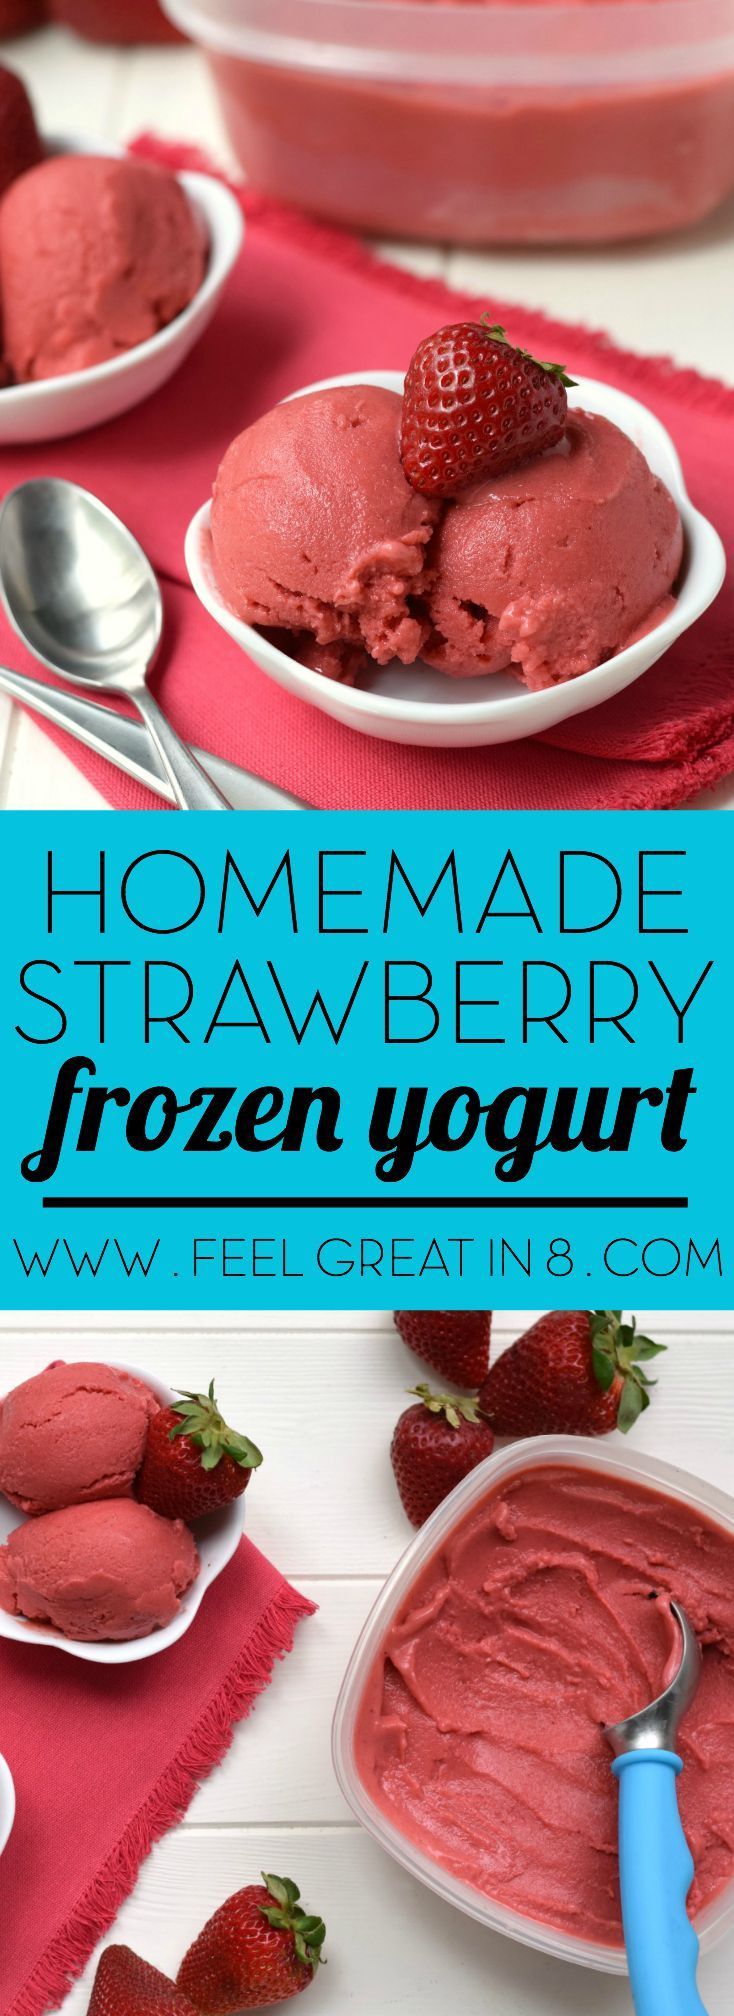 You only need 5 minutes and 4 healthy real food ingredients to make this Homemade Strawberry Frozen Yogurt – No ice cream maker